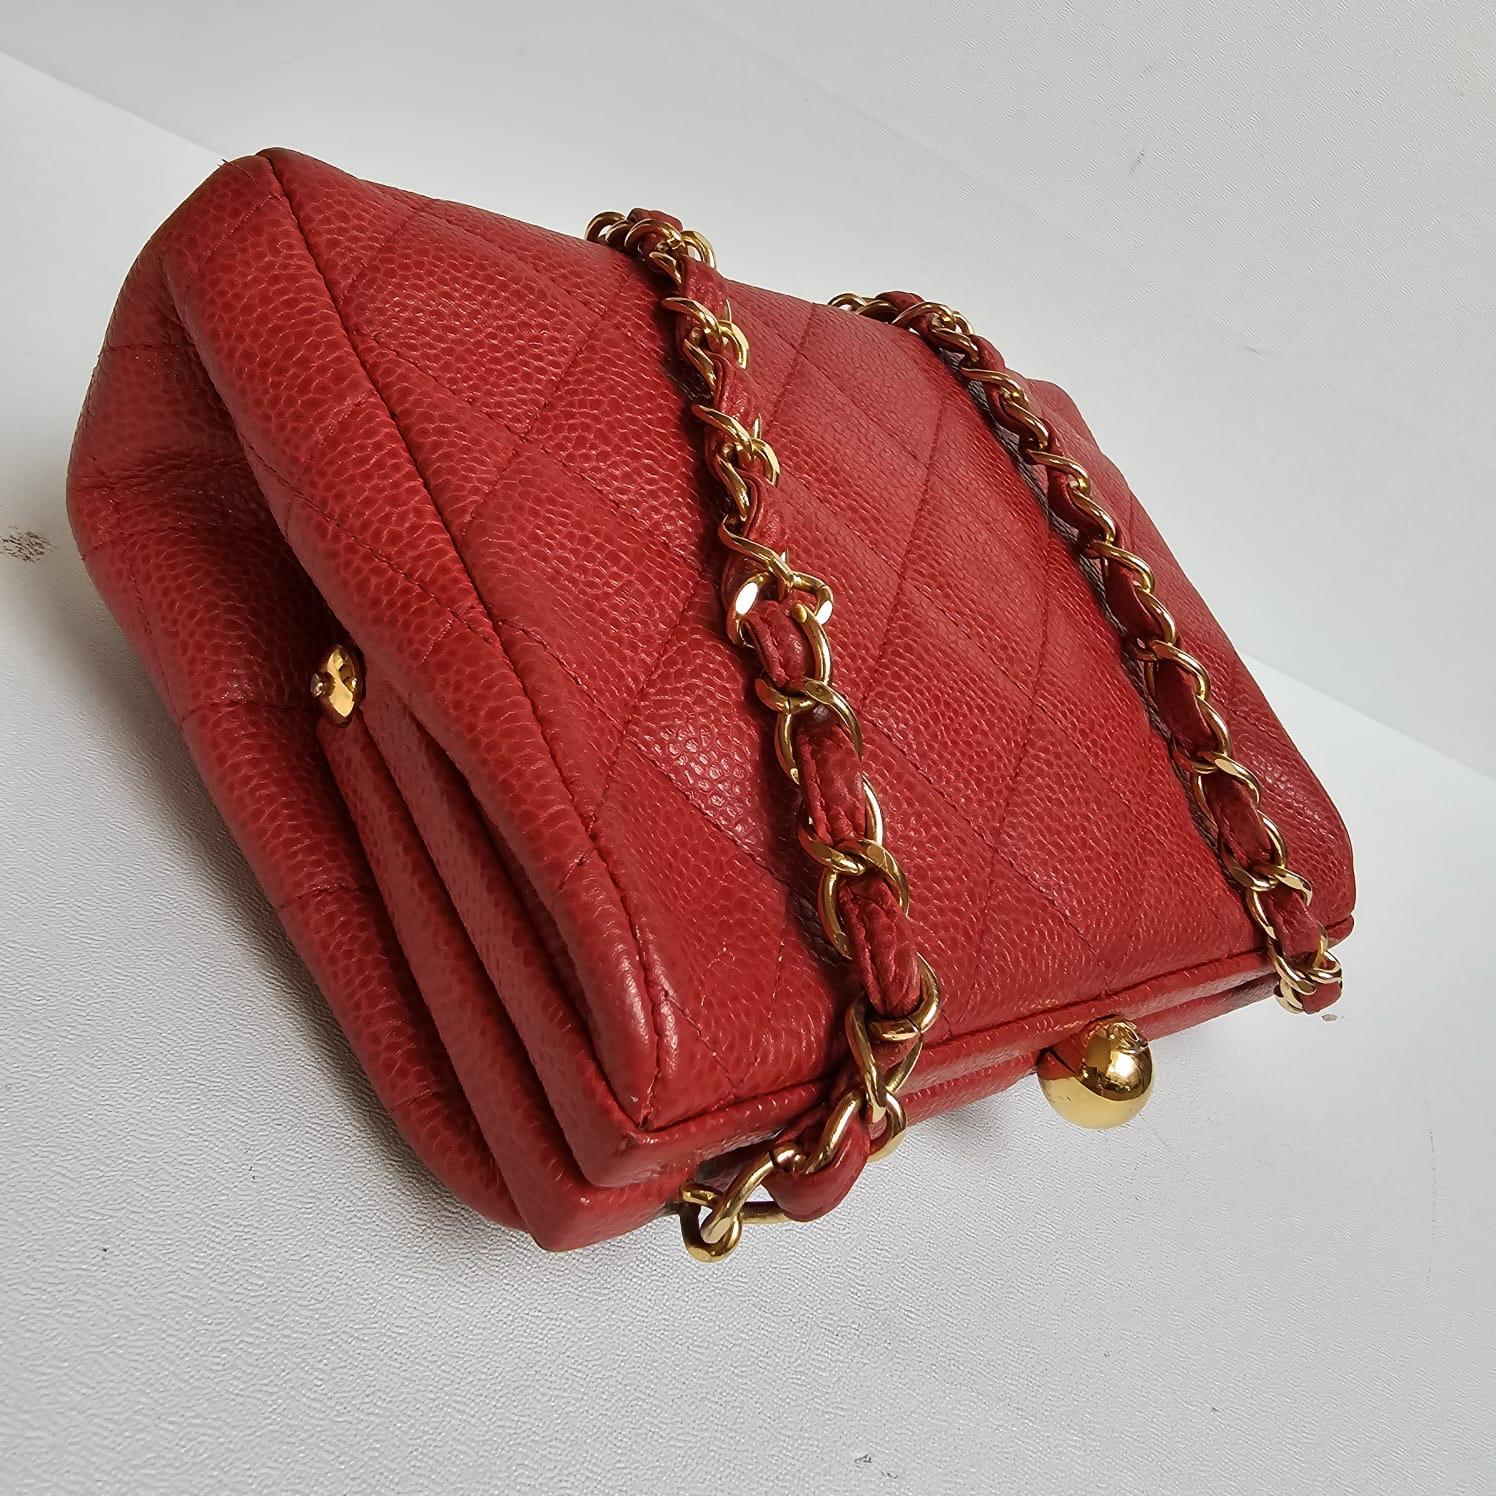 Vintage 1990s Chanel Red Caviar Quilted Mini Purse Sling Bag For Sale 8